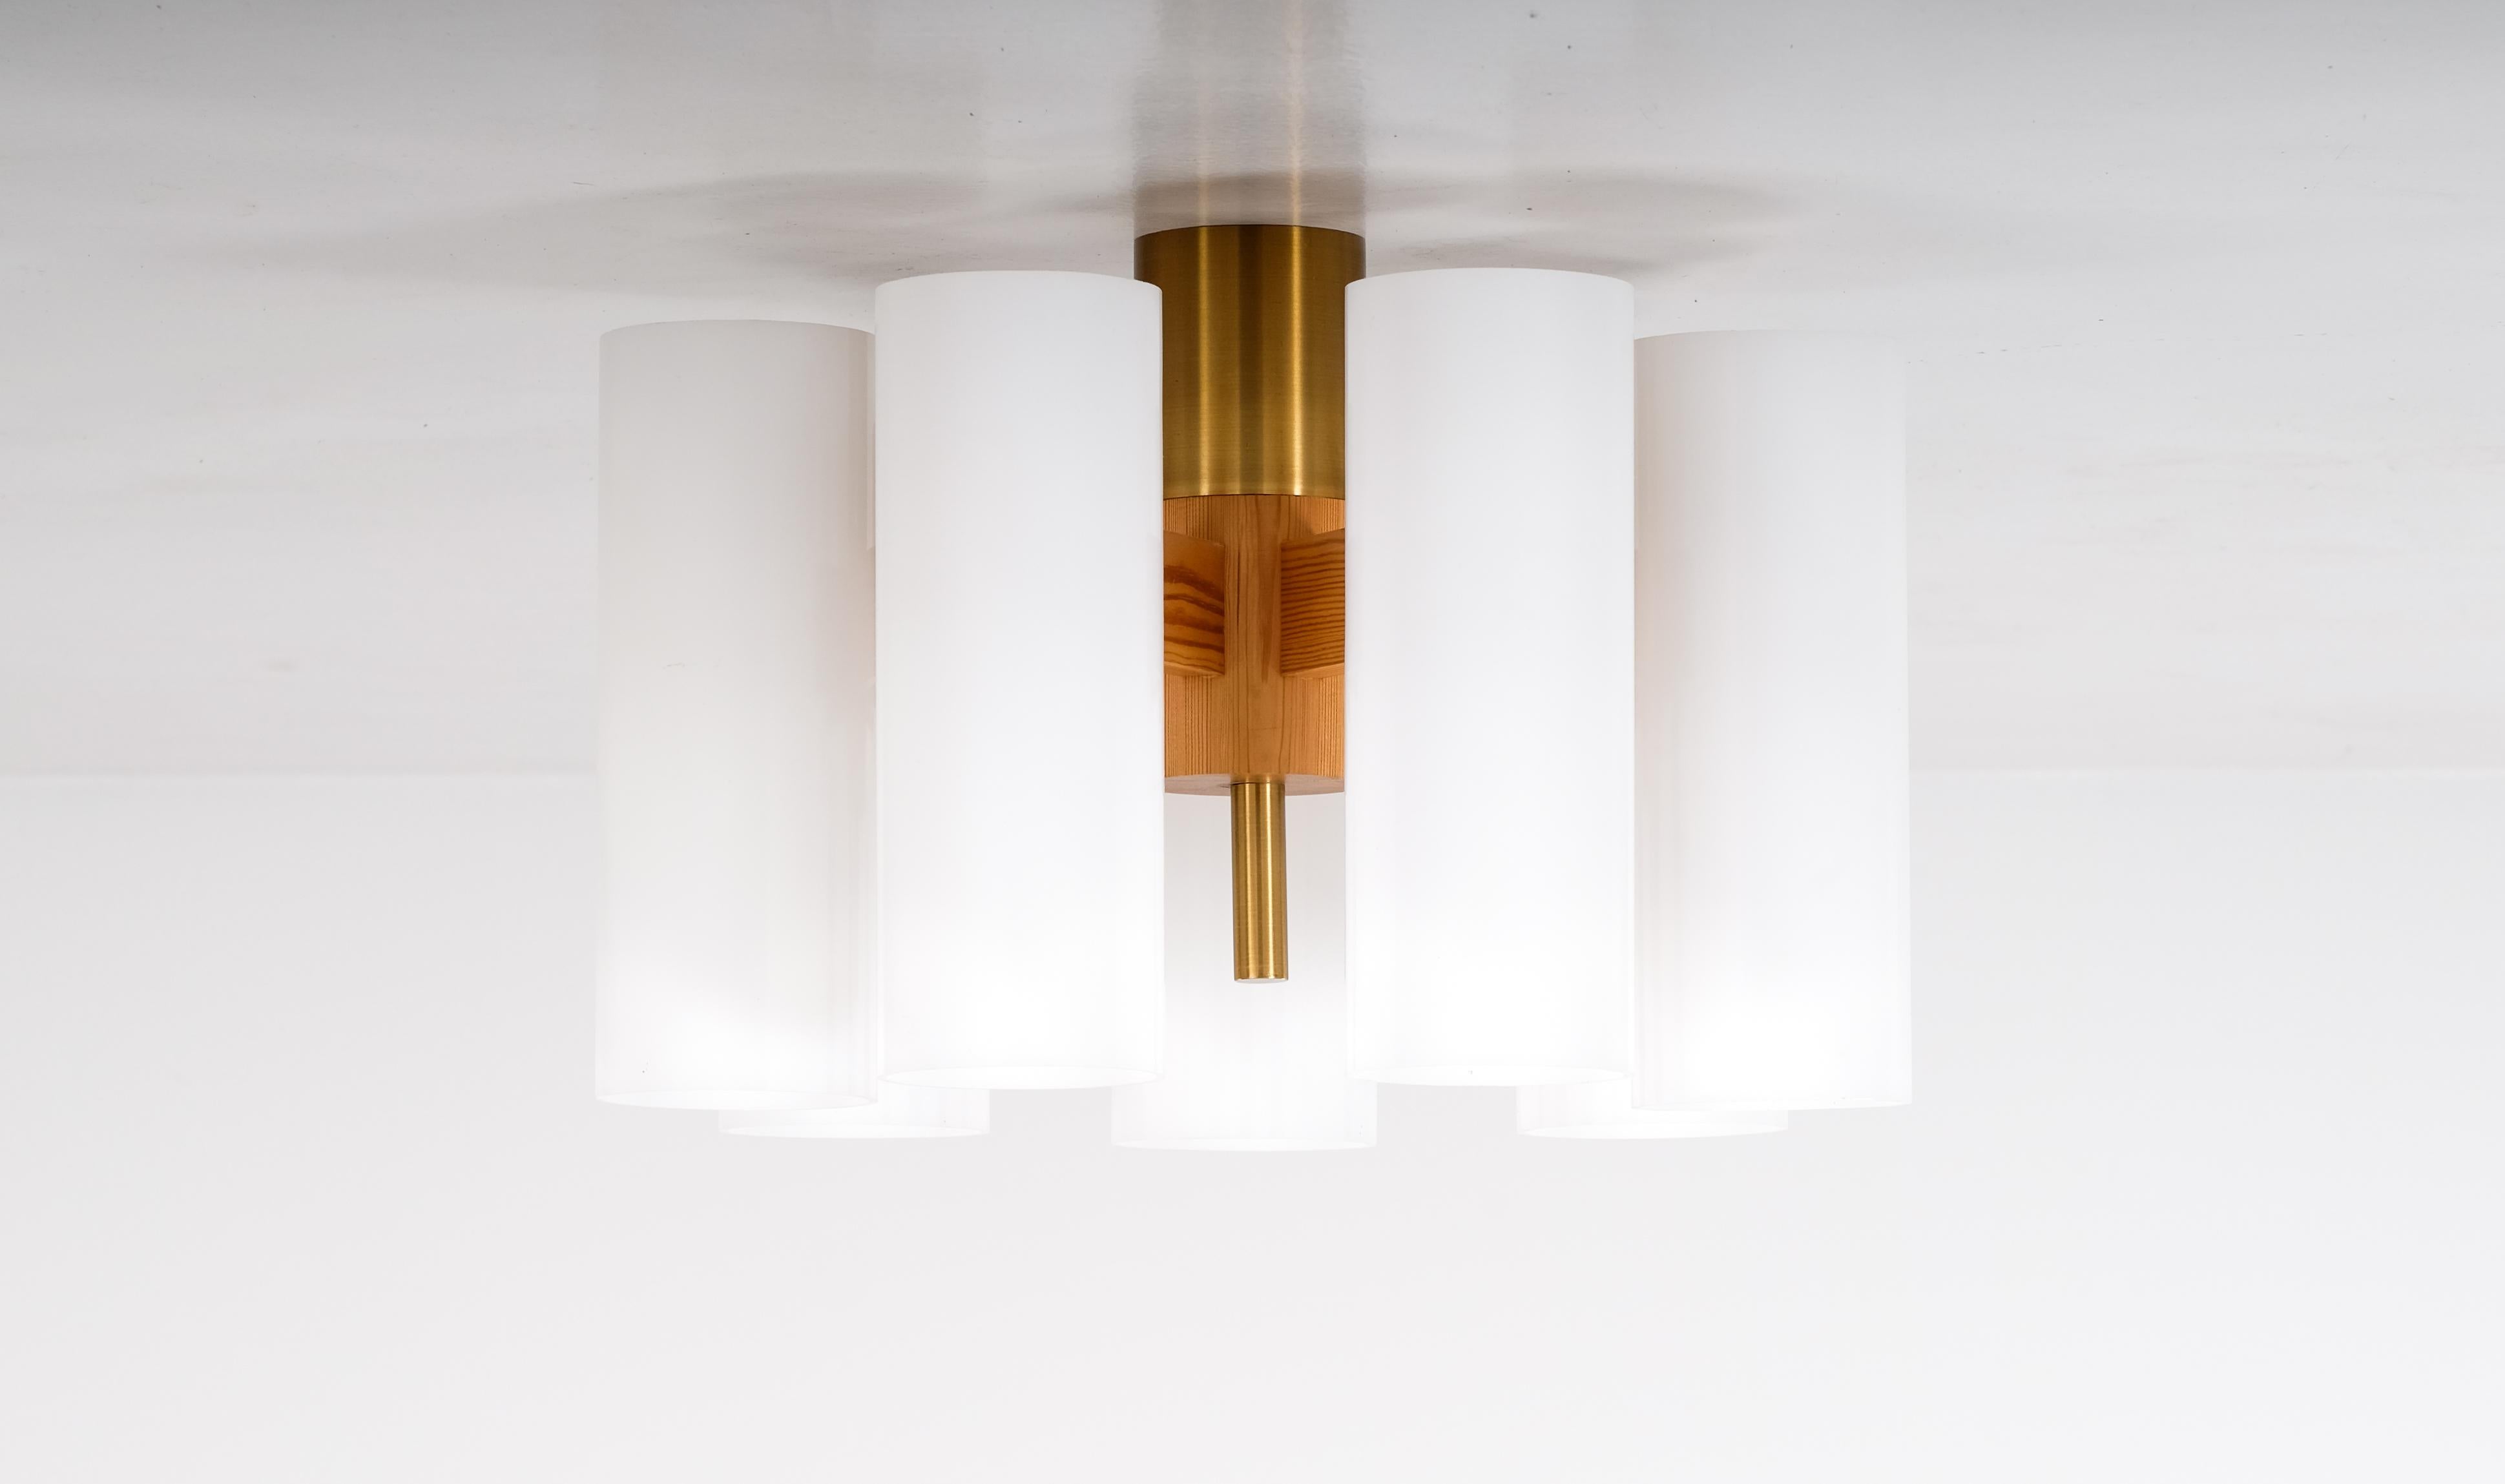 Swedish Set of 4 Luxus ceiling lamps by Uno & Östen Kristiansson, 1960s For Sale